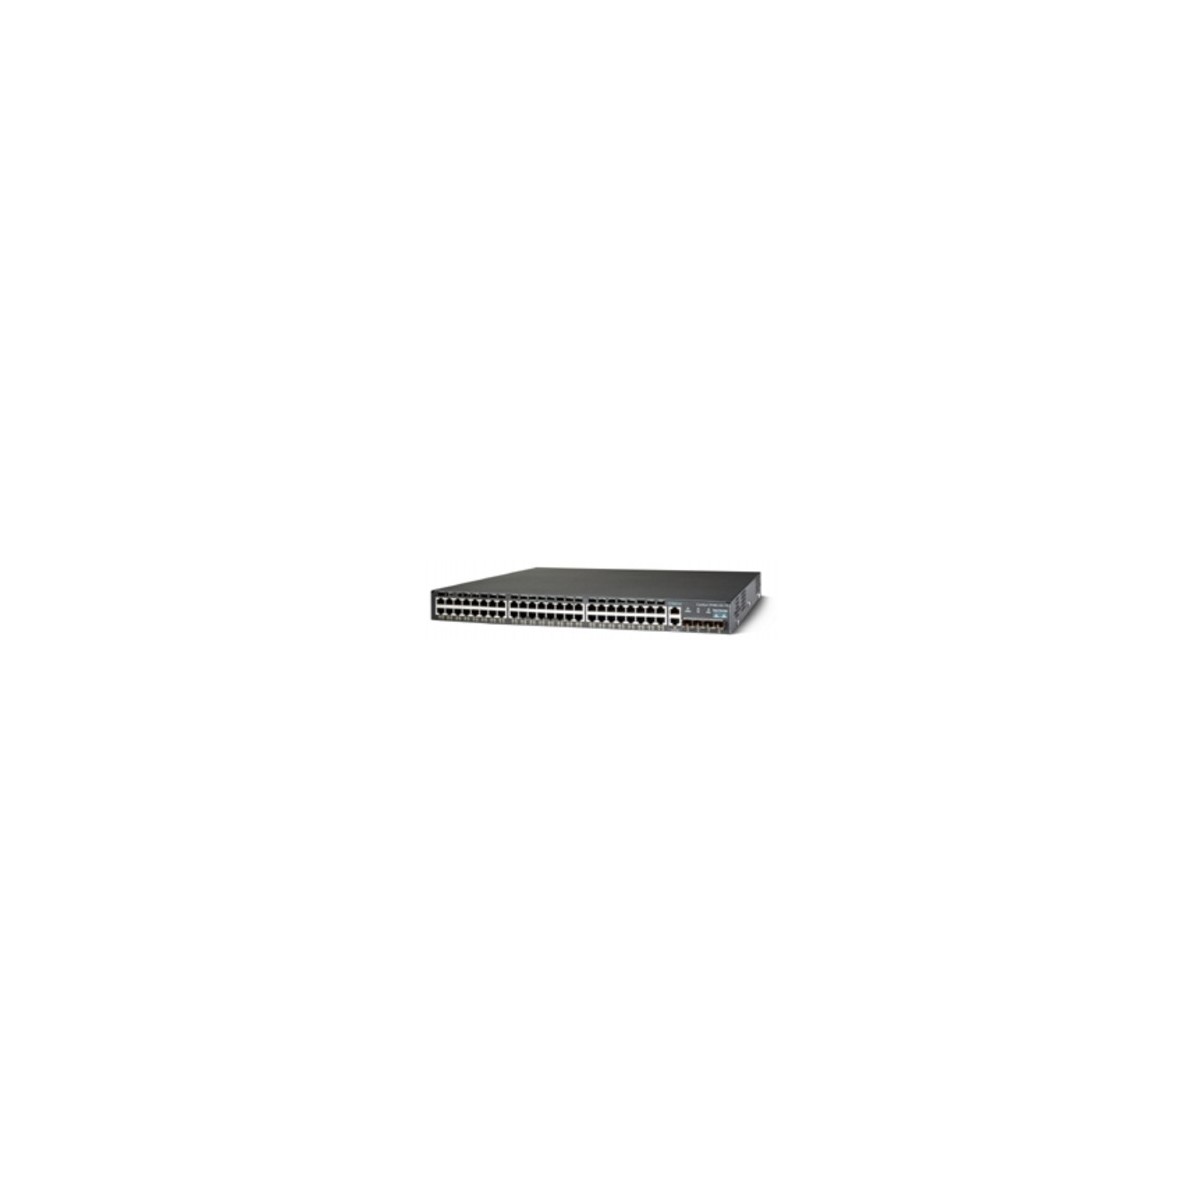 Cisco Catalyst 2948G-GE-TX Gigabit Ethernet Switch - Switch - 1 Gbps - Amount of ports: - Rack module